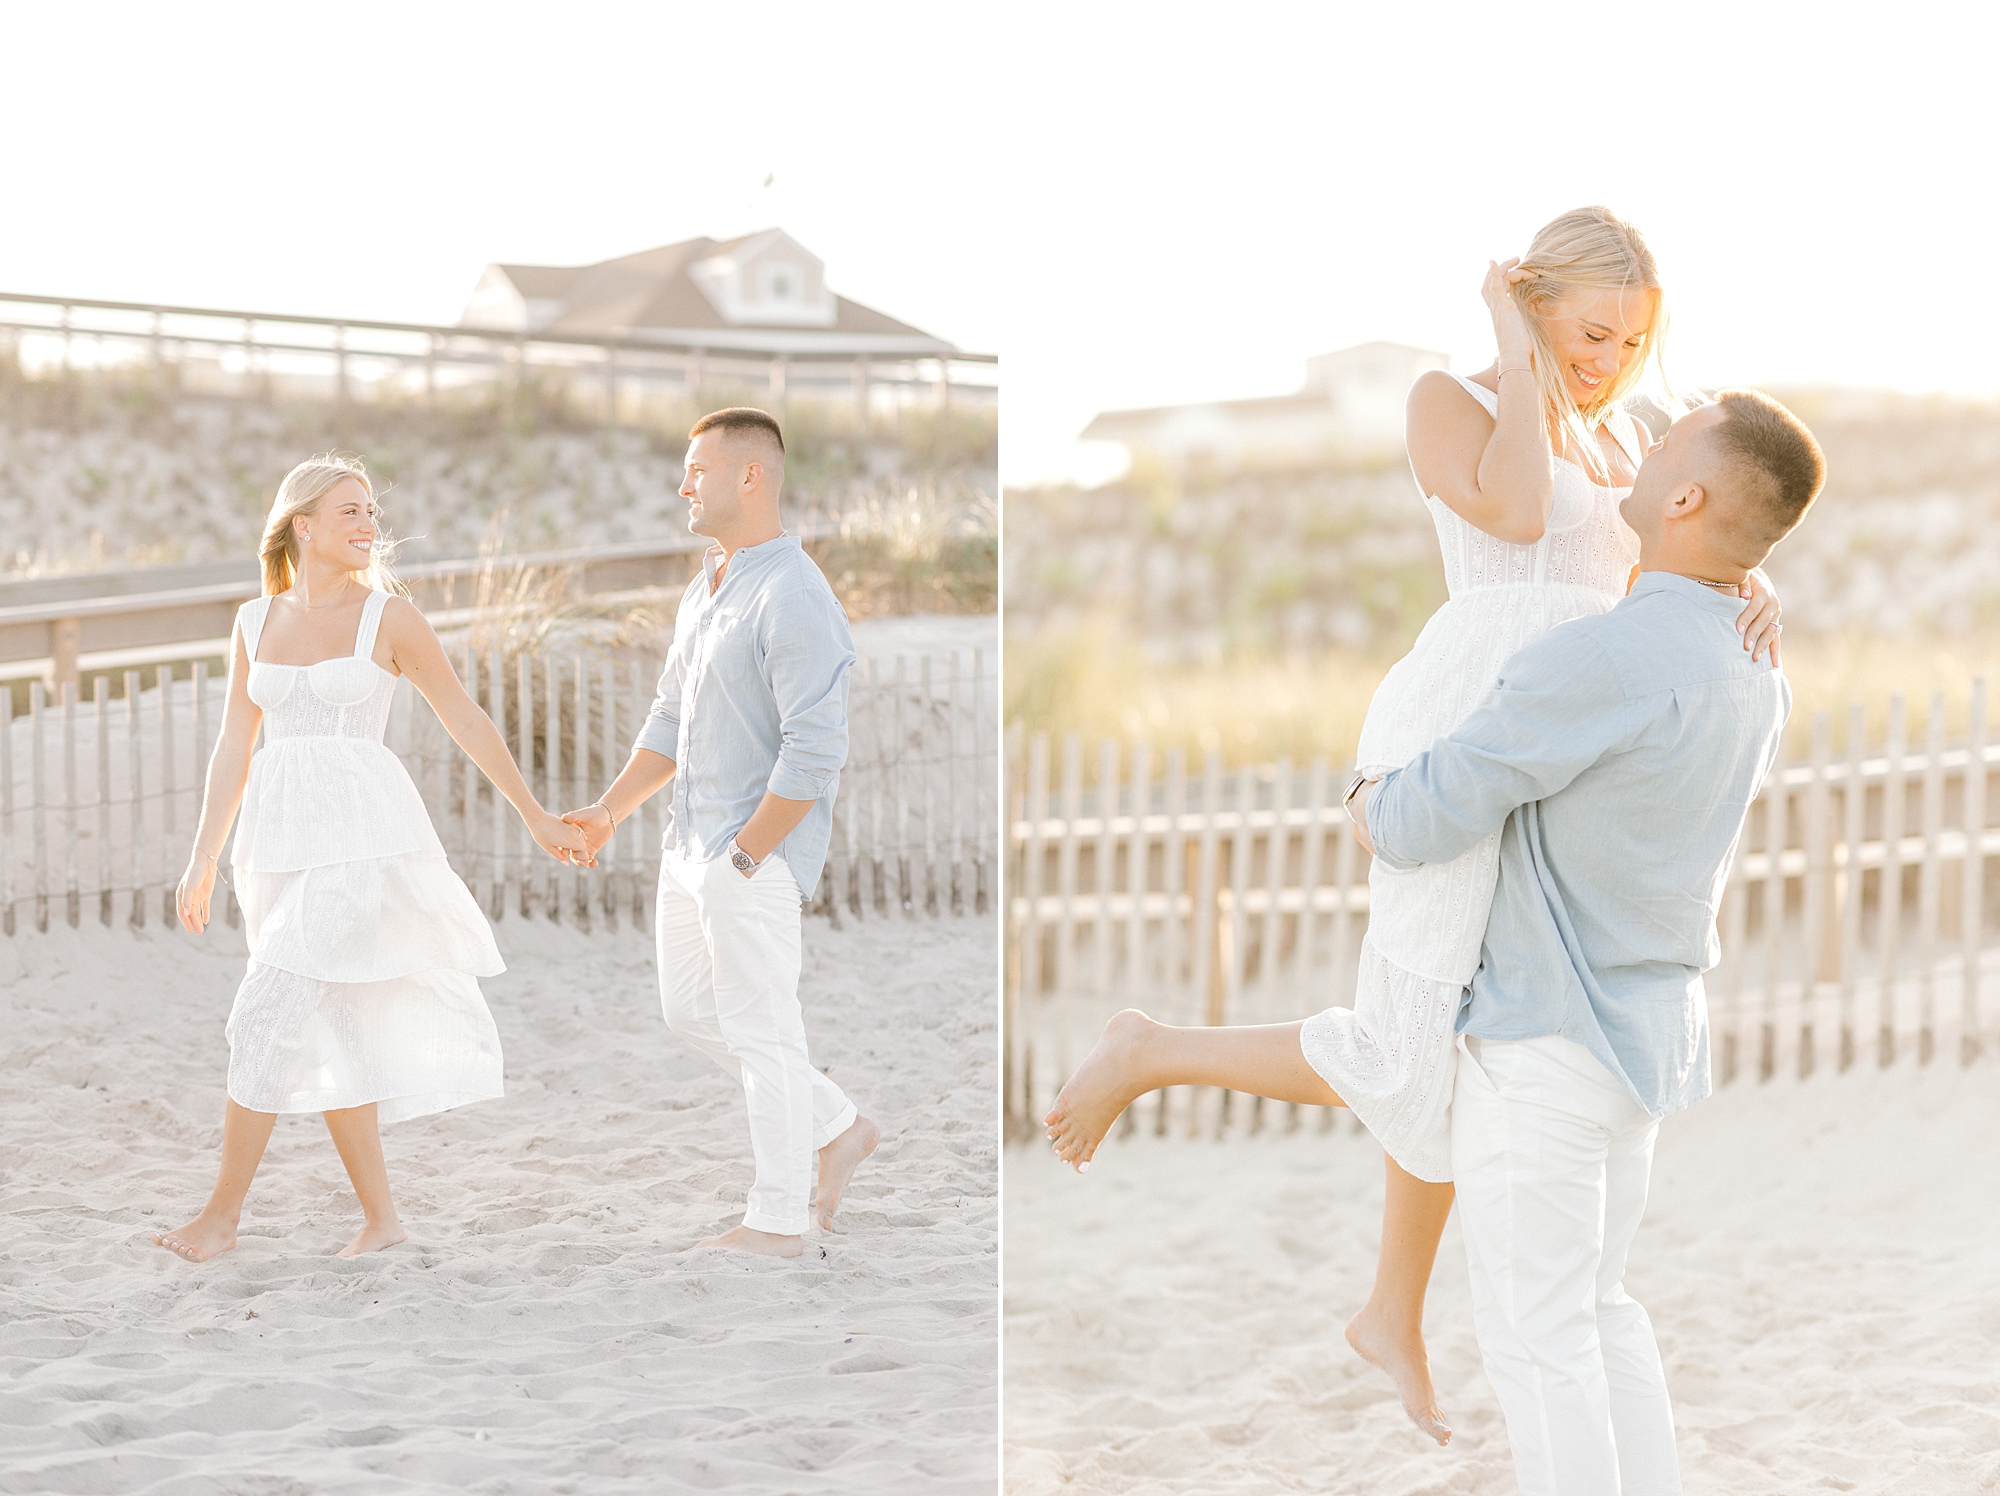 man in blue shirt lifts up woman in white summer dress on beach